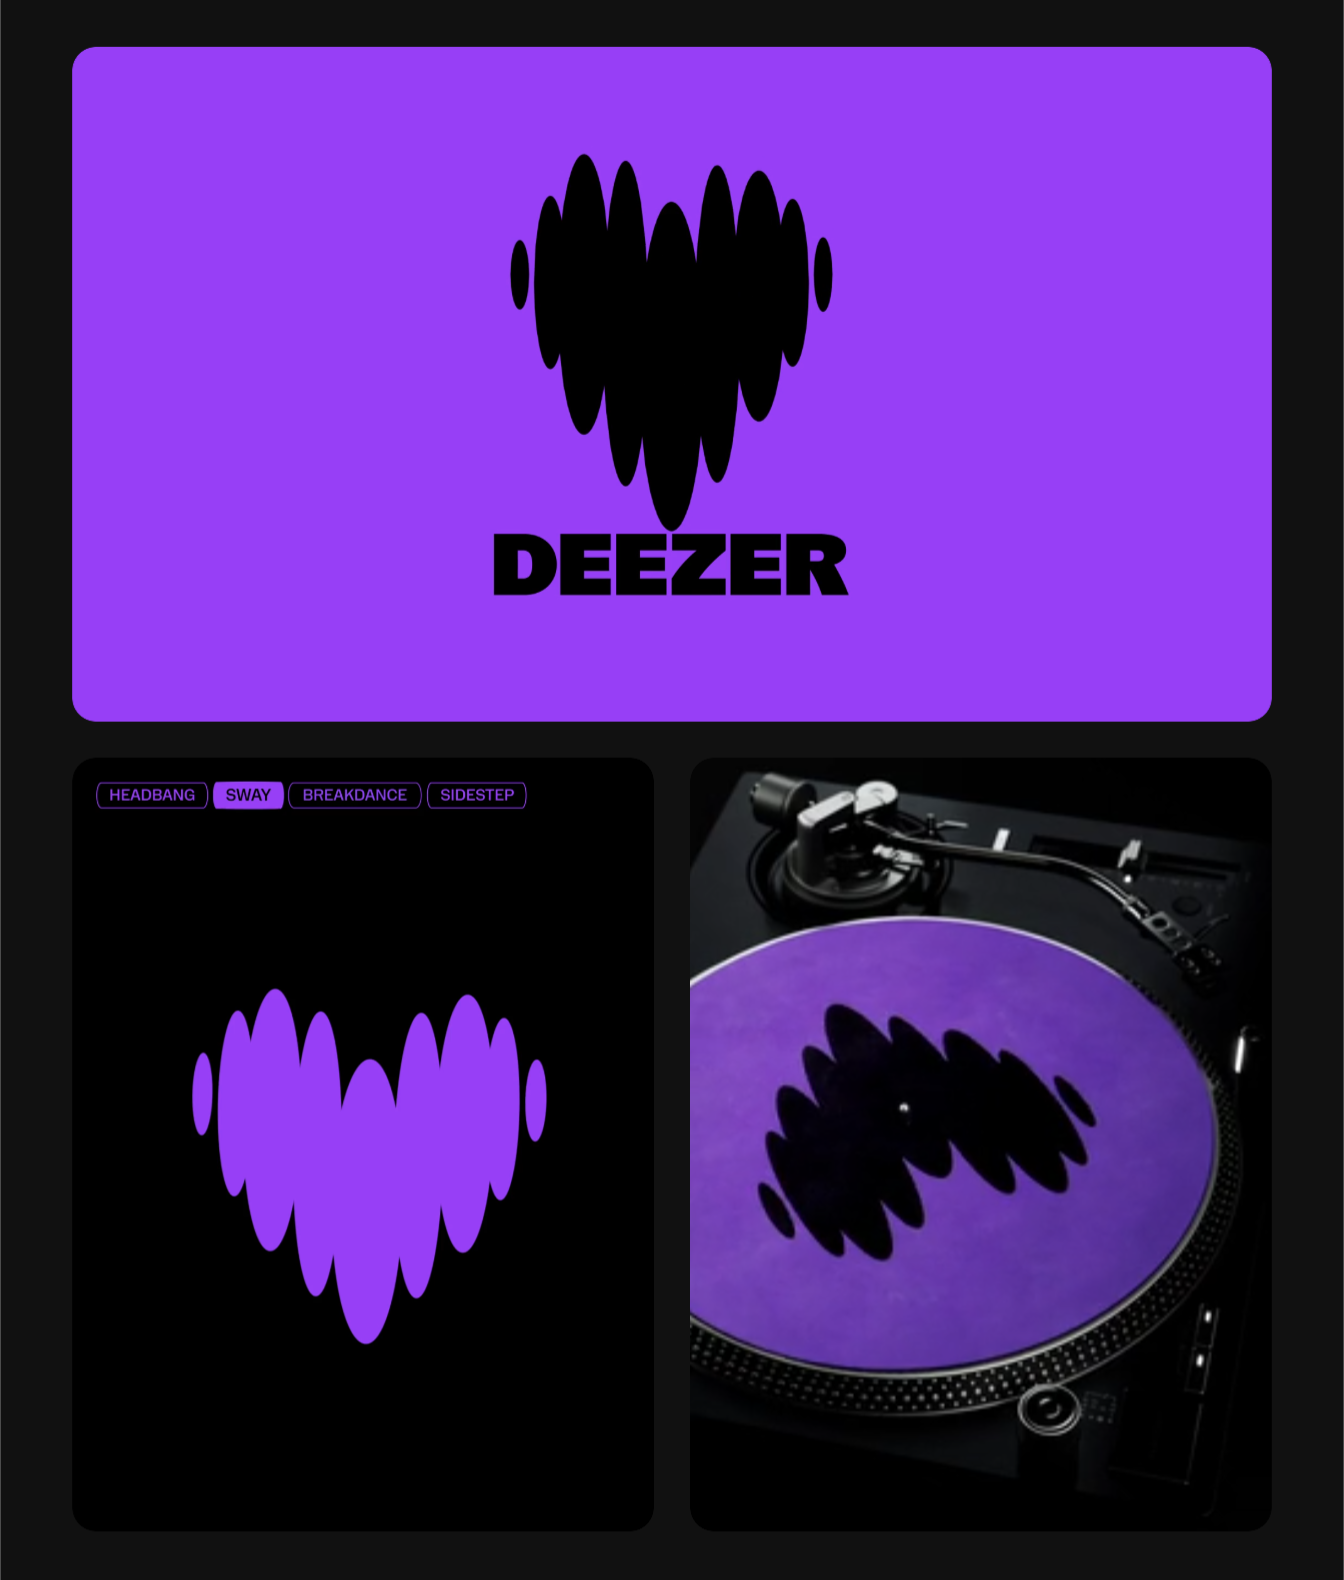 Artifact from the Deezer's Branding and Visual Identity Transformation article on abduzeedo